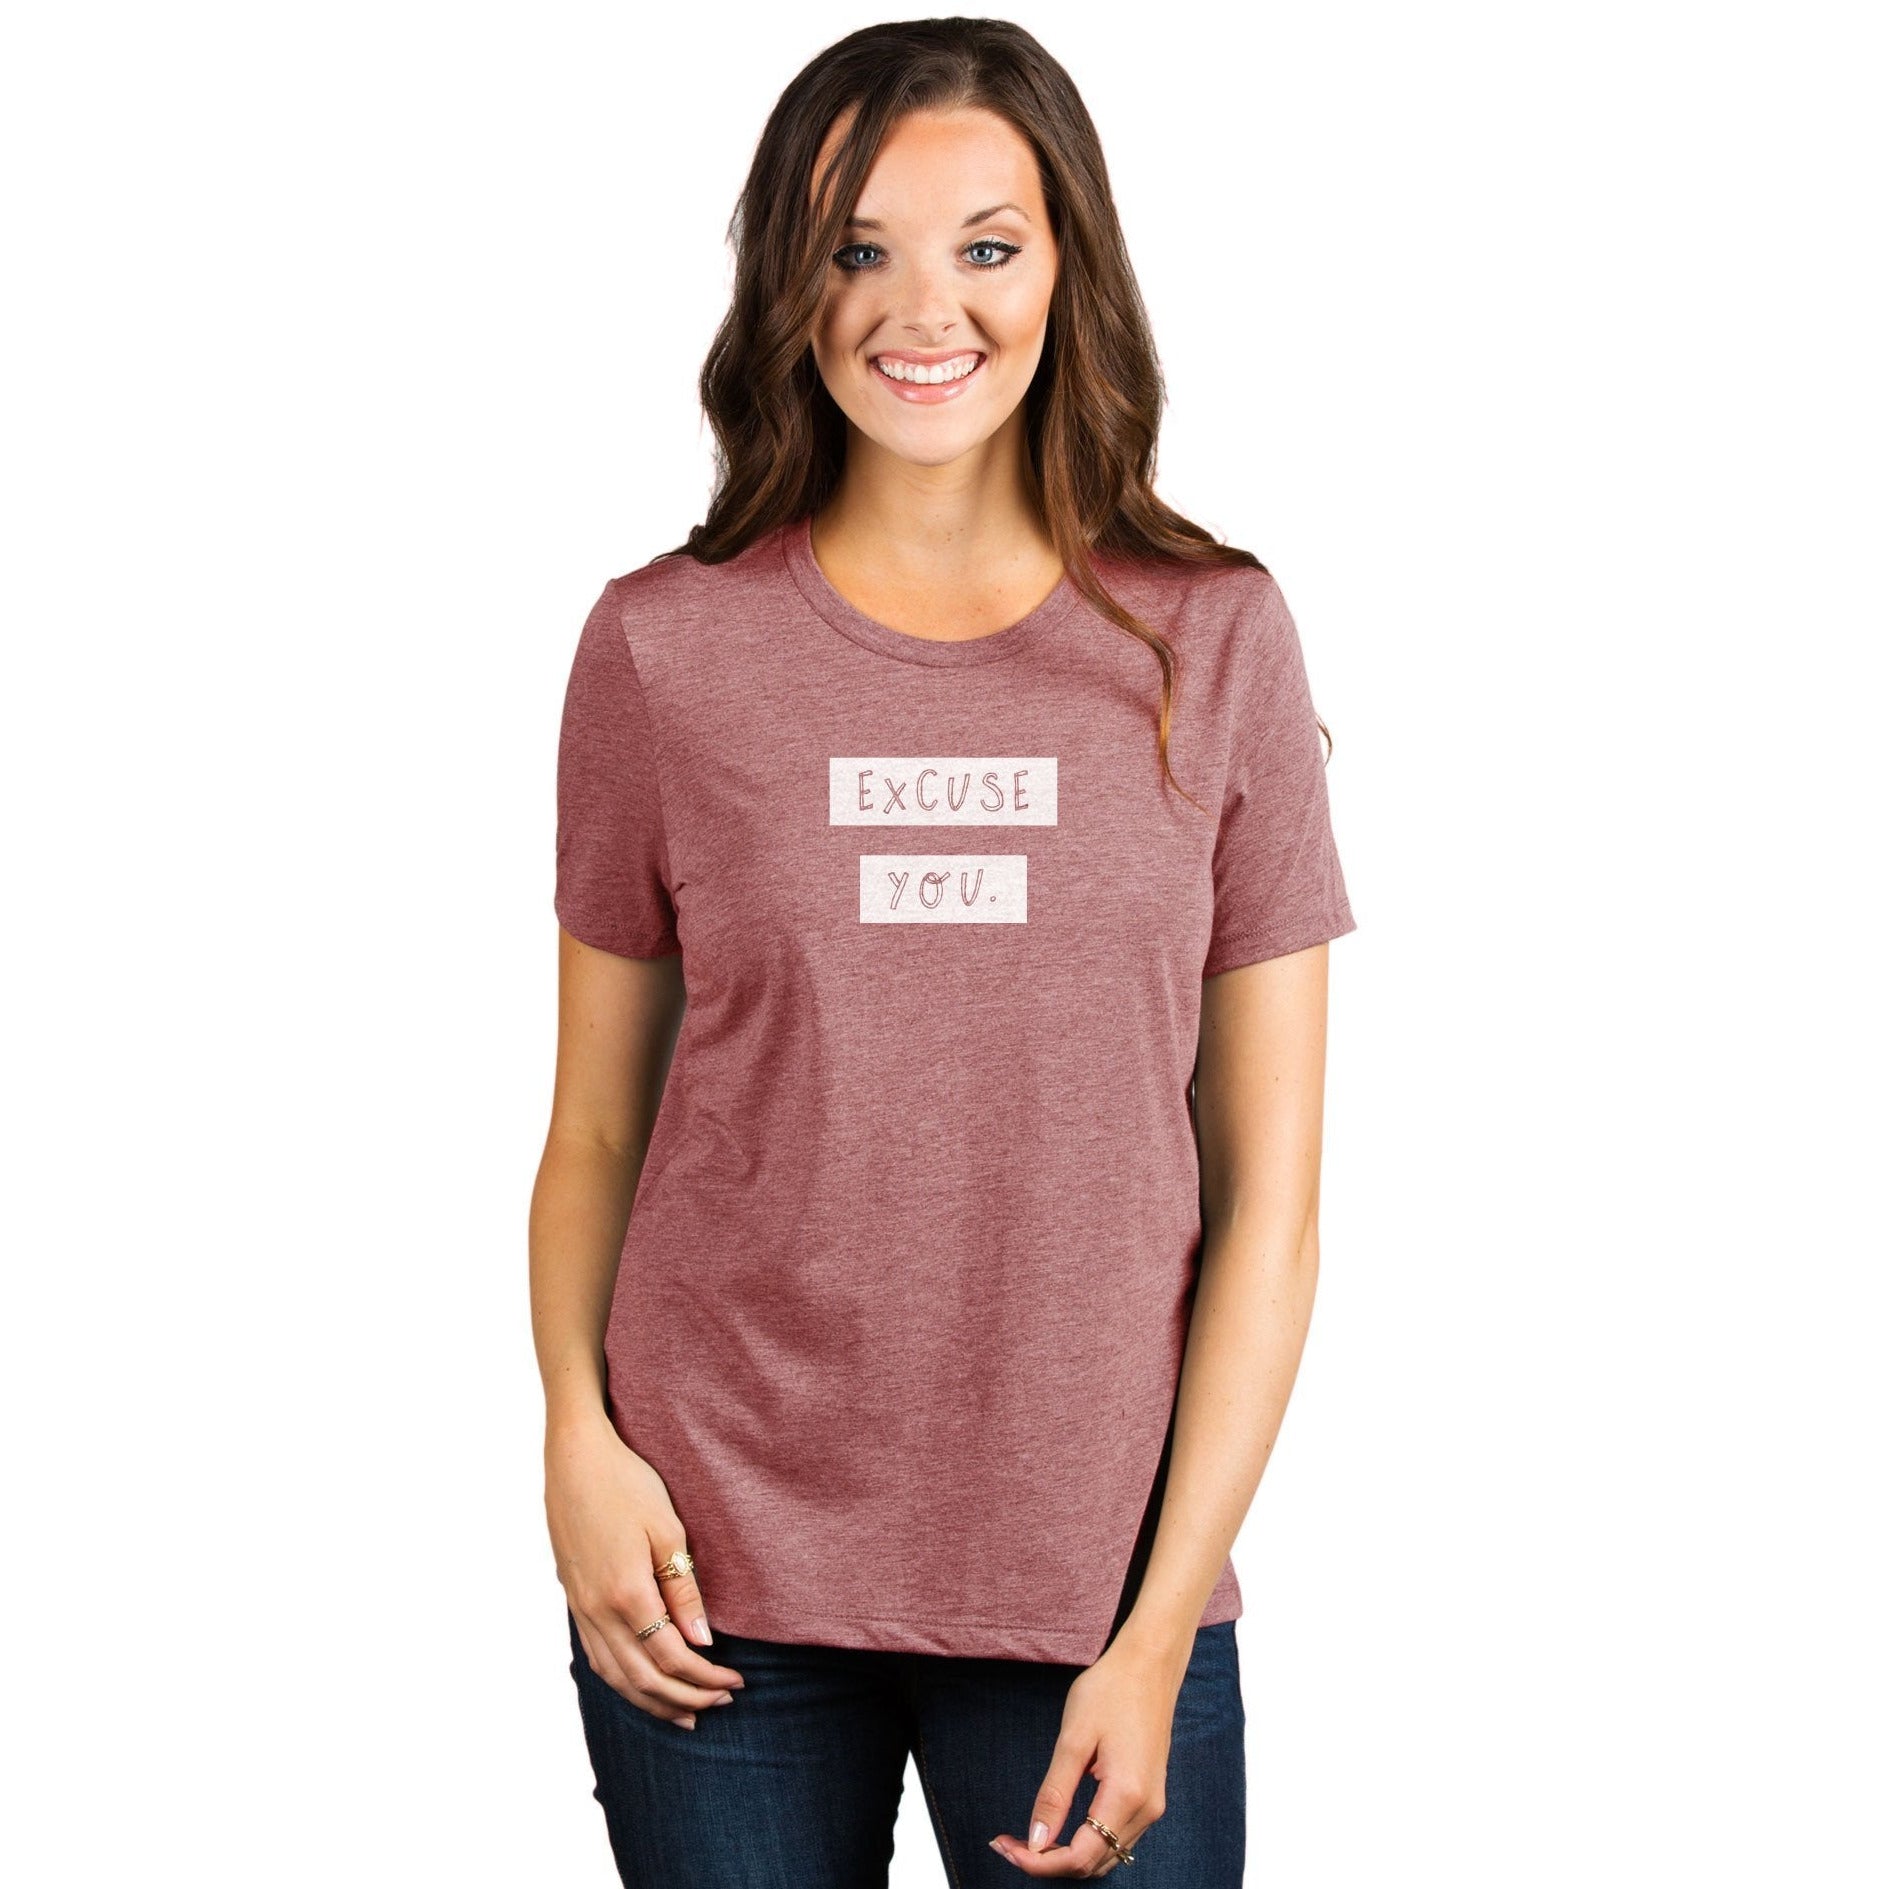 Excuse You Women's Relaxed Crewneck T-Shirt Top Tee Heather Rouge Model
